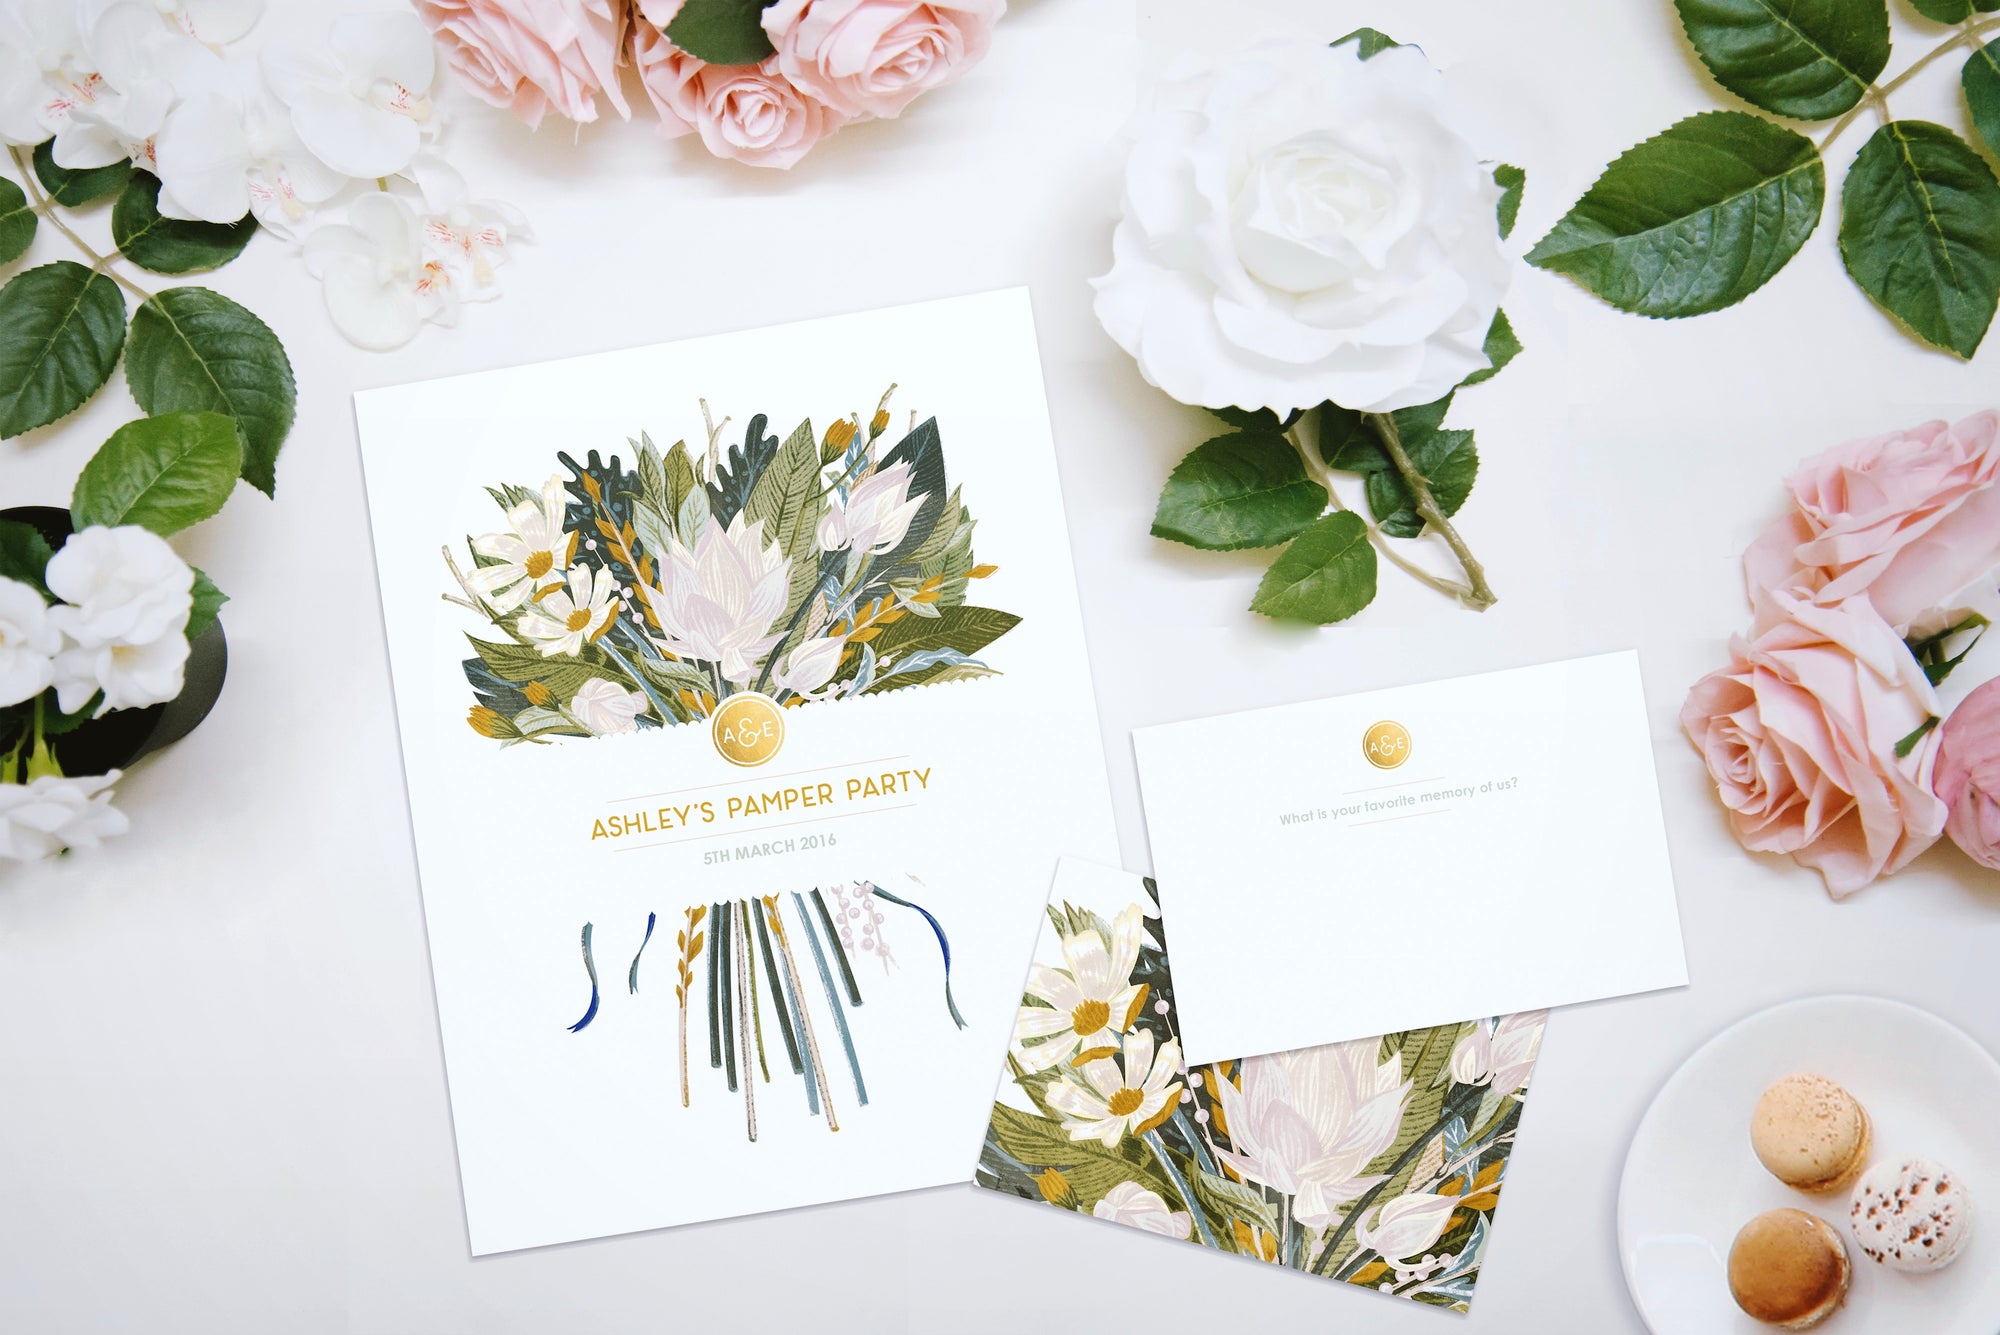 You're Invited! Invitation Design for Every Occasion - gestalten US Shop